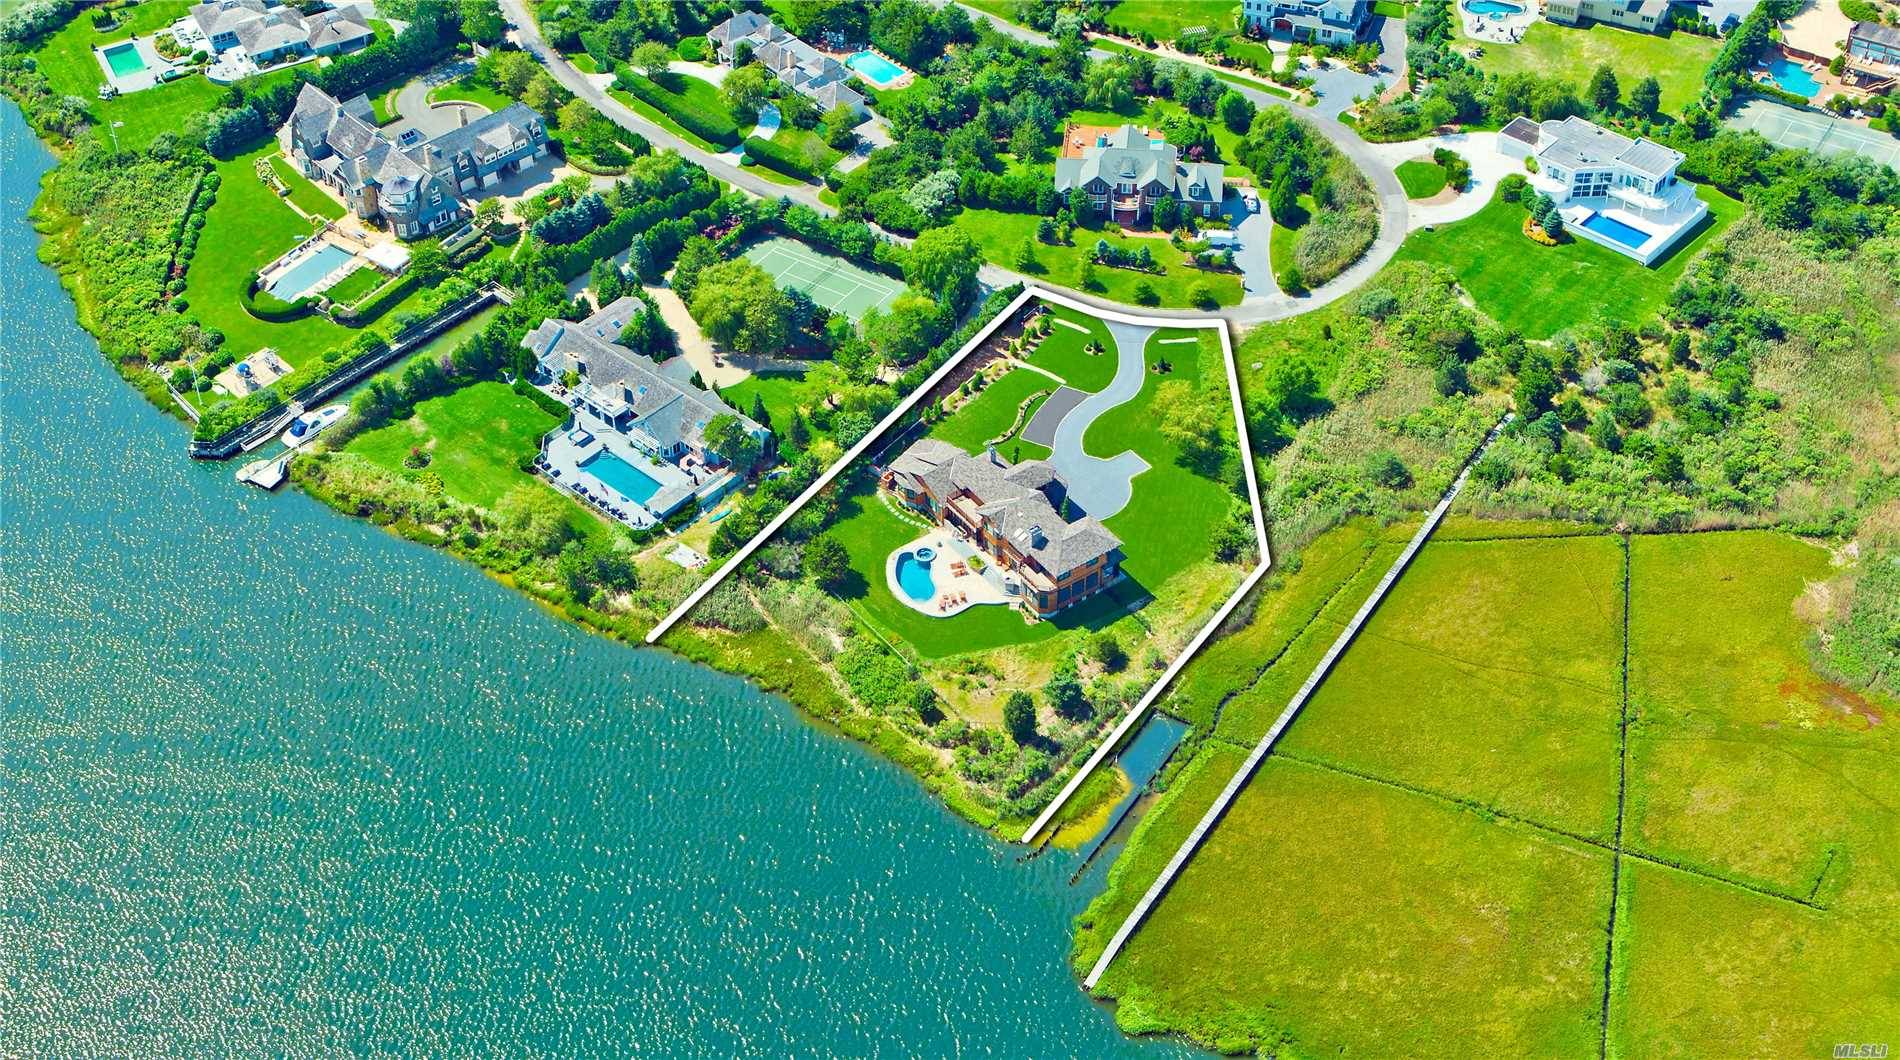 Quality-Built Home On A Secluded, Bayfront Parcel In One Of Westhampton Beach's Coveted Estate Areas.